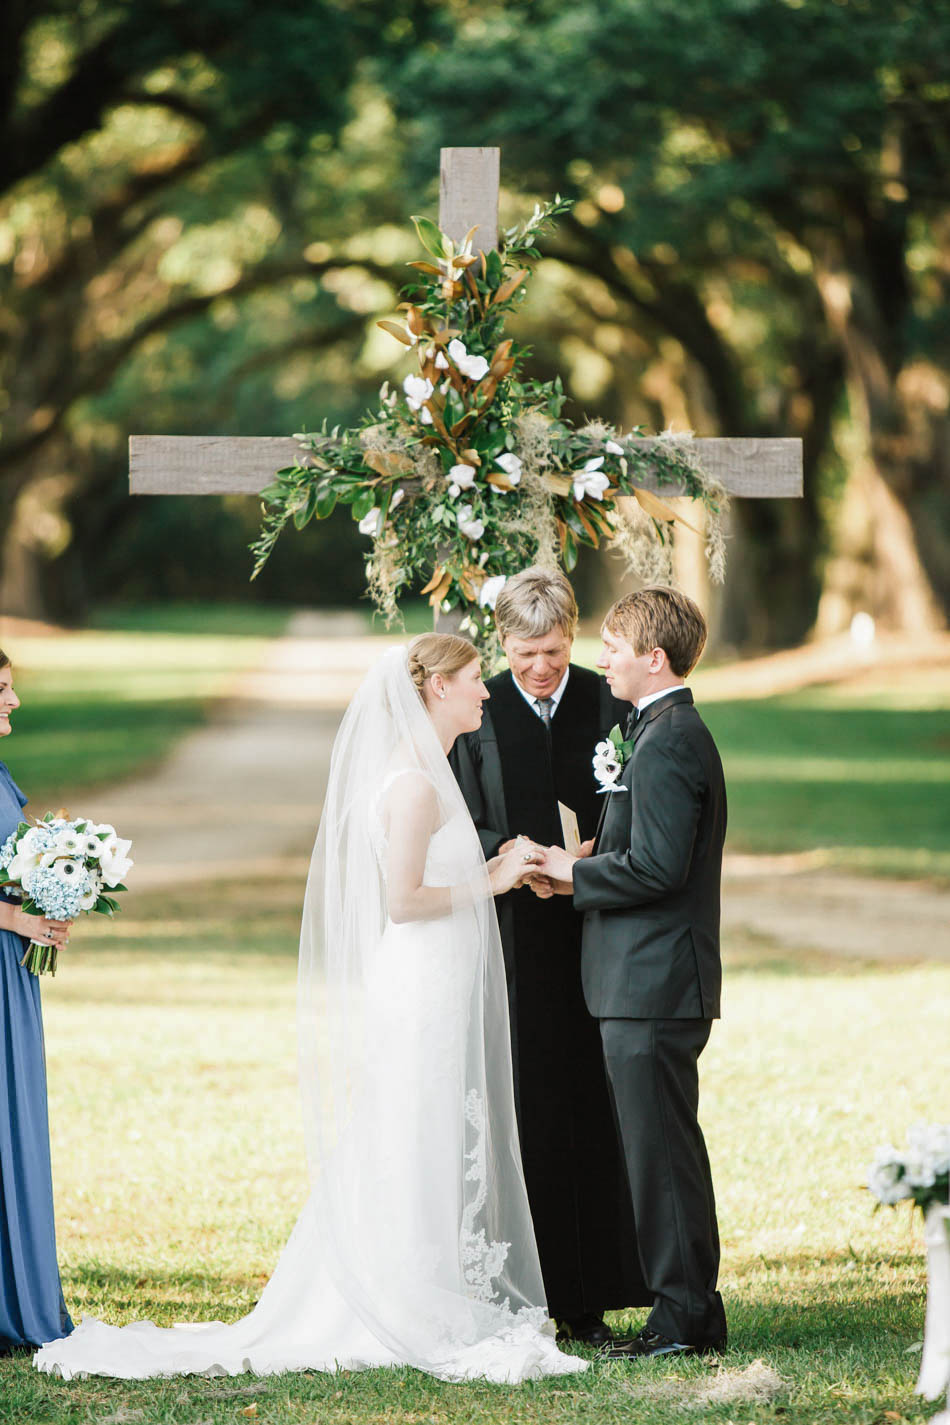 Bride and groom exchange vows, Oakland Plantation, Mt Pleasant, South Carolina Kate Timbers Photography. http://katetimbers.com #katetimbersphotography // Charleston Photography // Inspiration